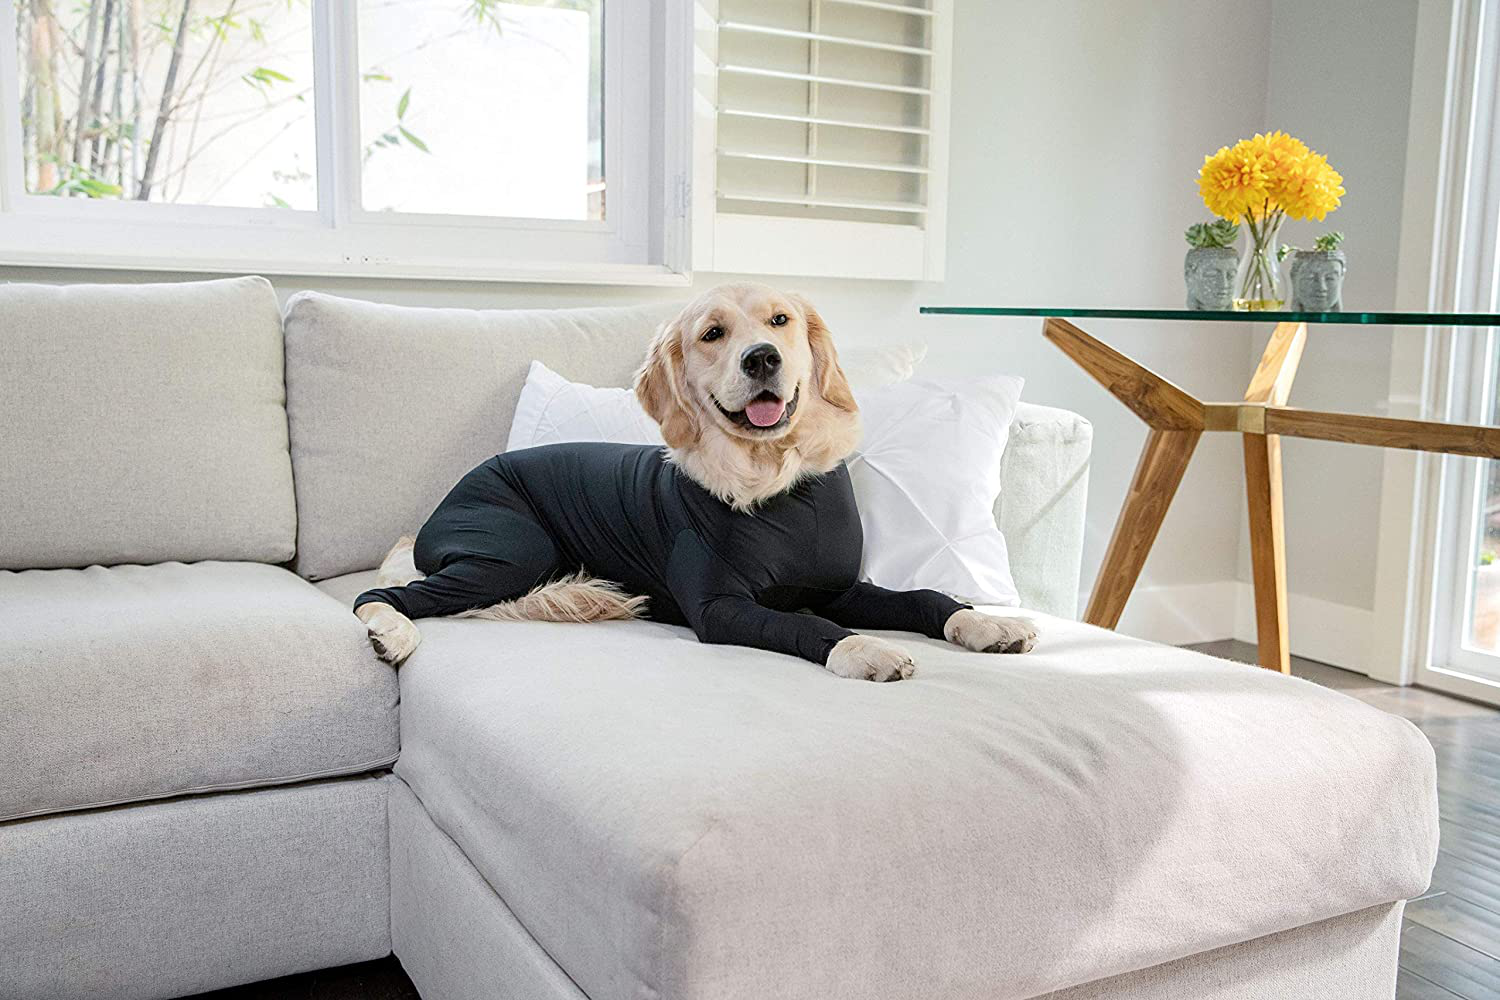 Shed Defender Original Dog Onesie - Seen on Shark Tank, Contains Shedding of Dog Hair for Home, Car, Travel, Anxiety Calming Shirt, Surgery Recovery Body Jumpsuit, E Collar Alternative